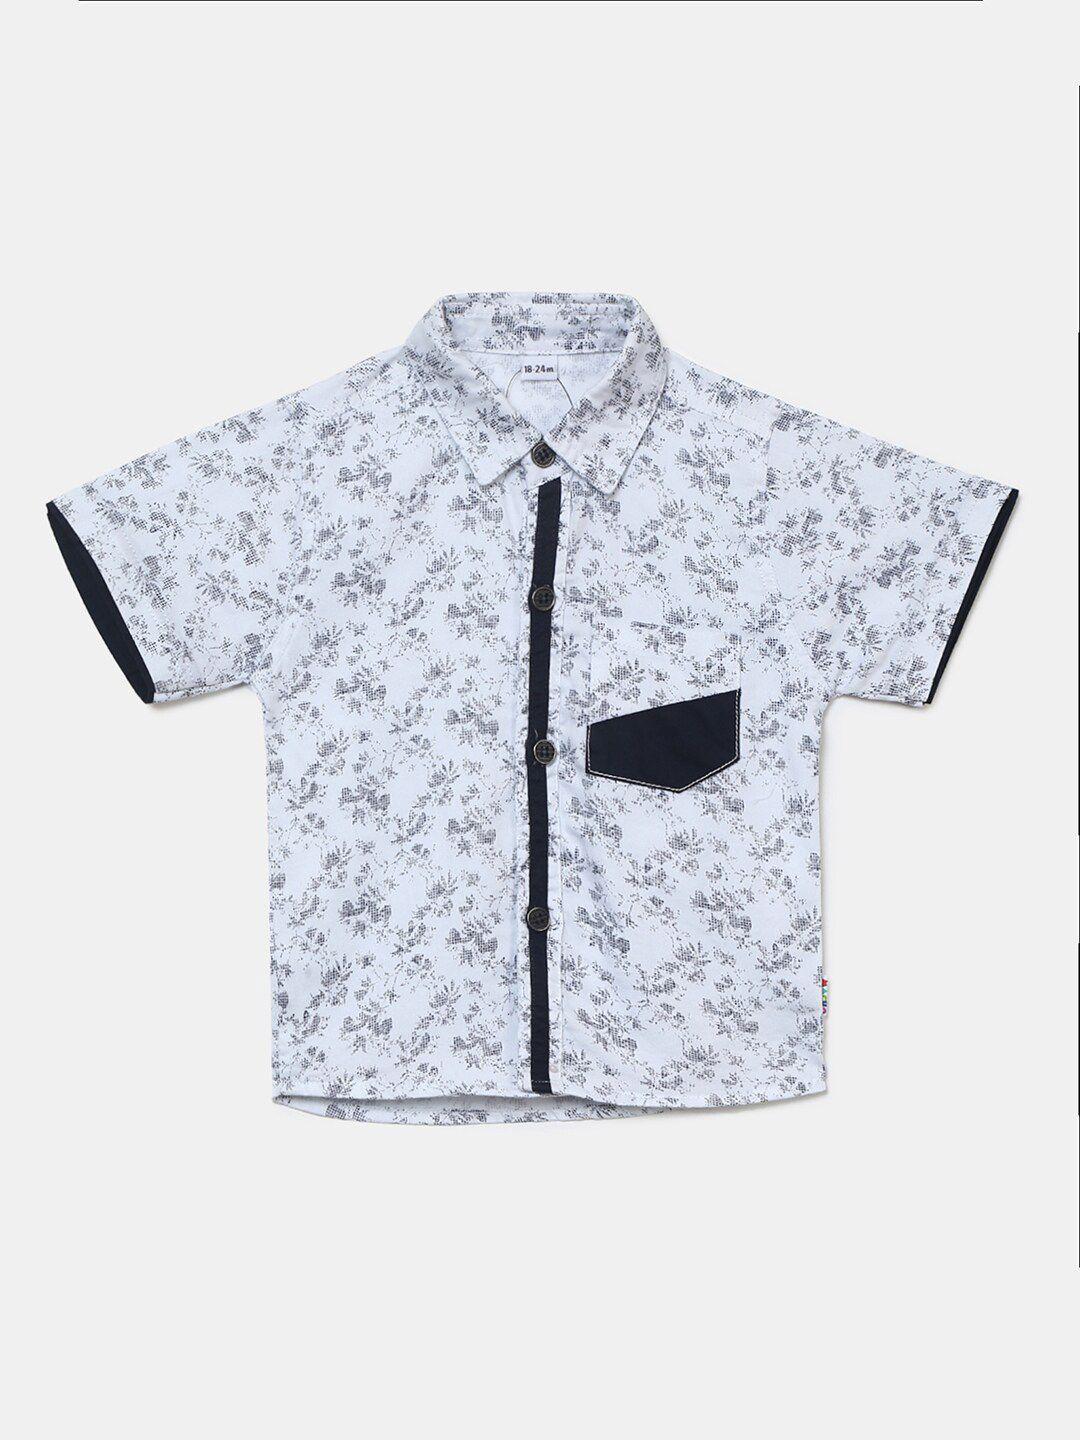 v-mart infant kids classic spread collar floral printed cotton casual shirt